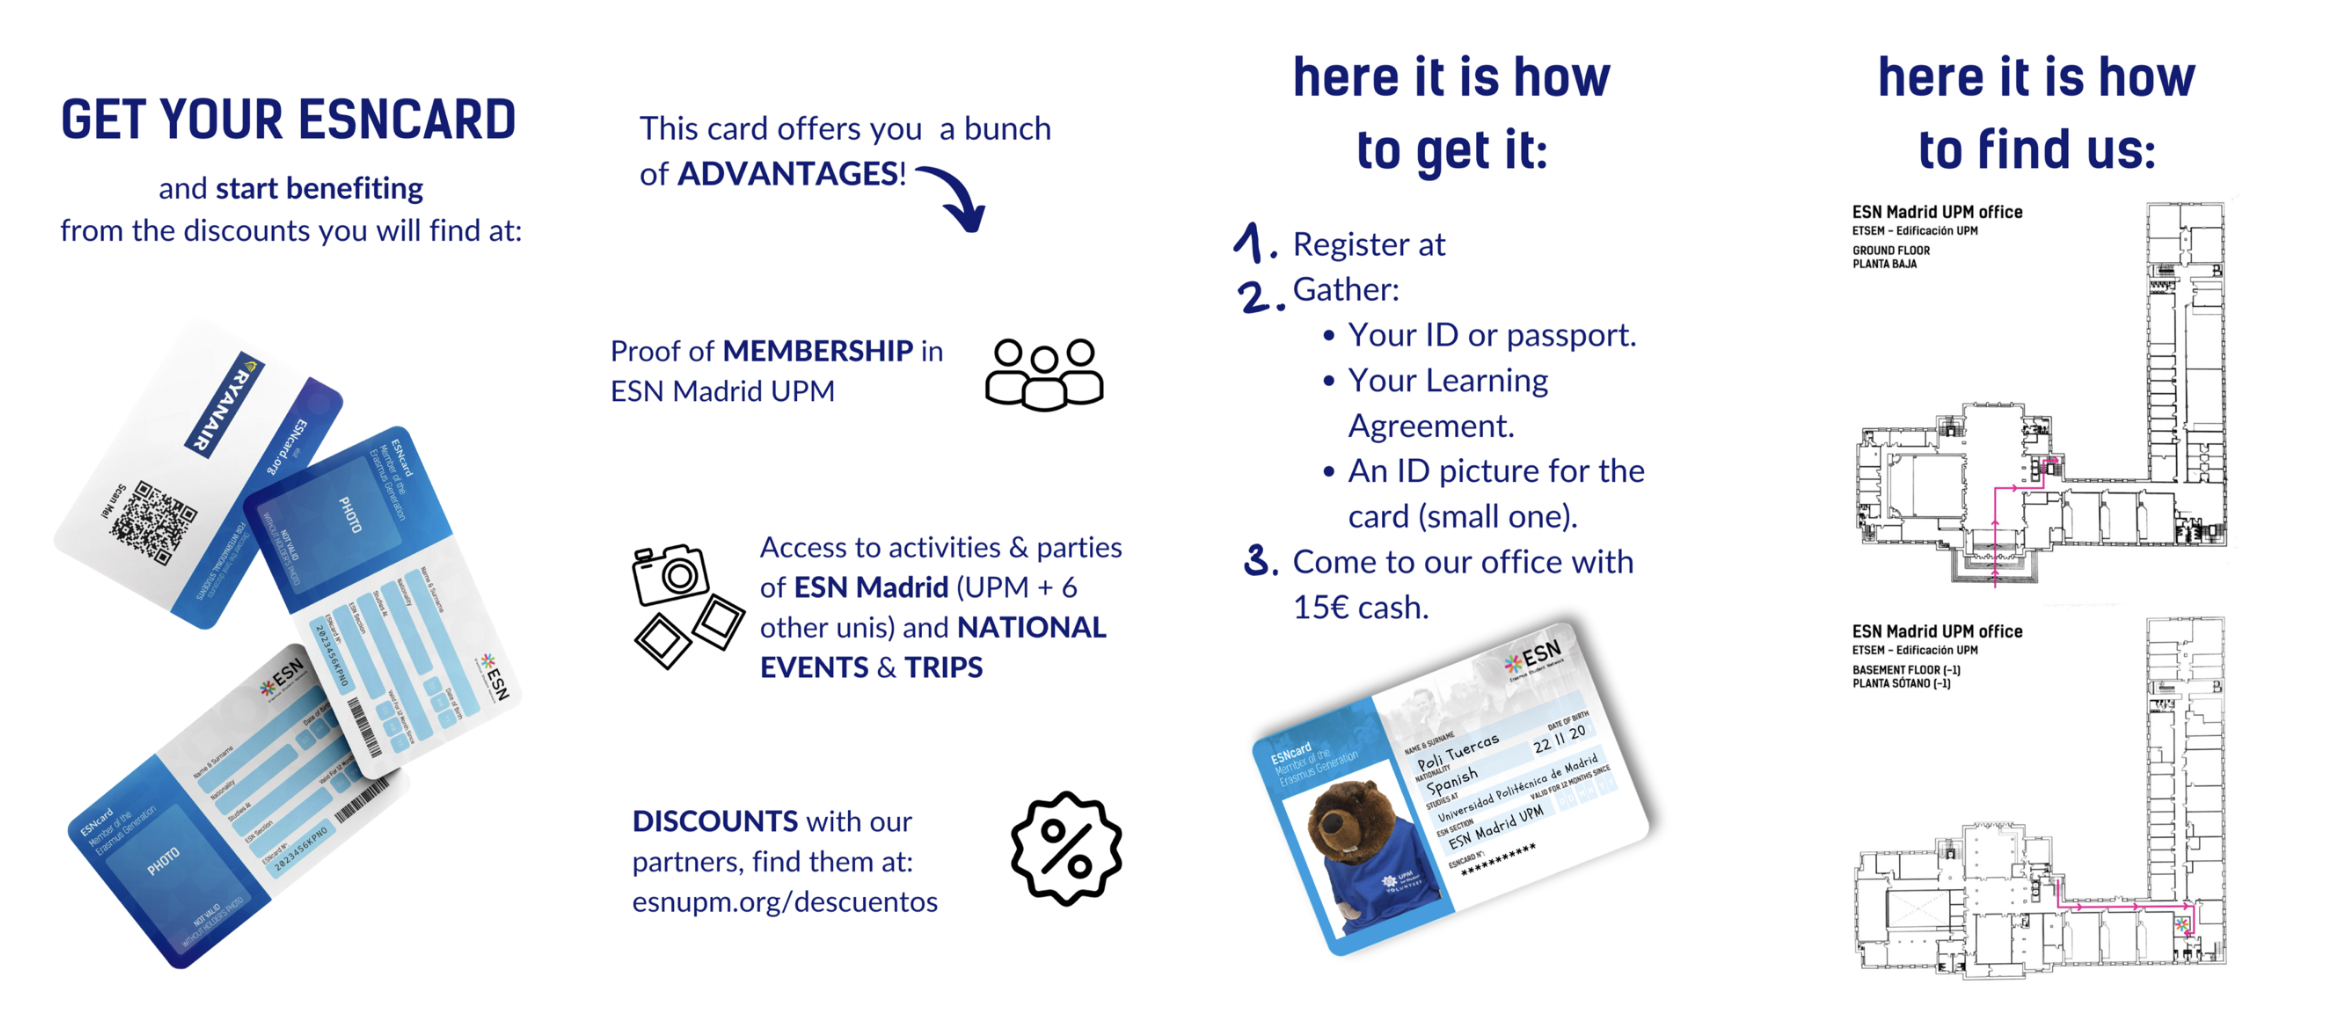 Brief ESNcard info and instructions